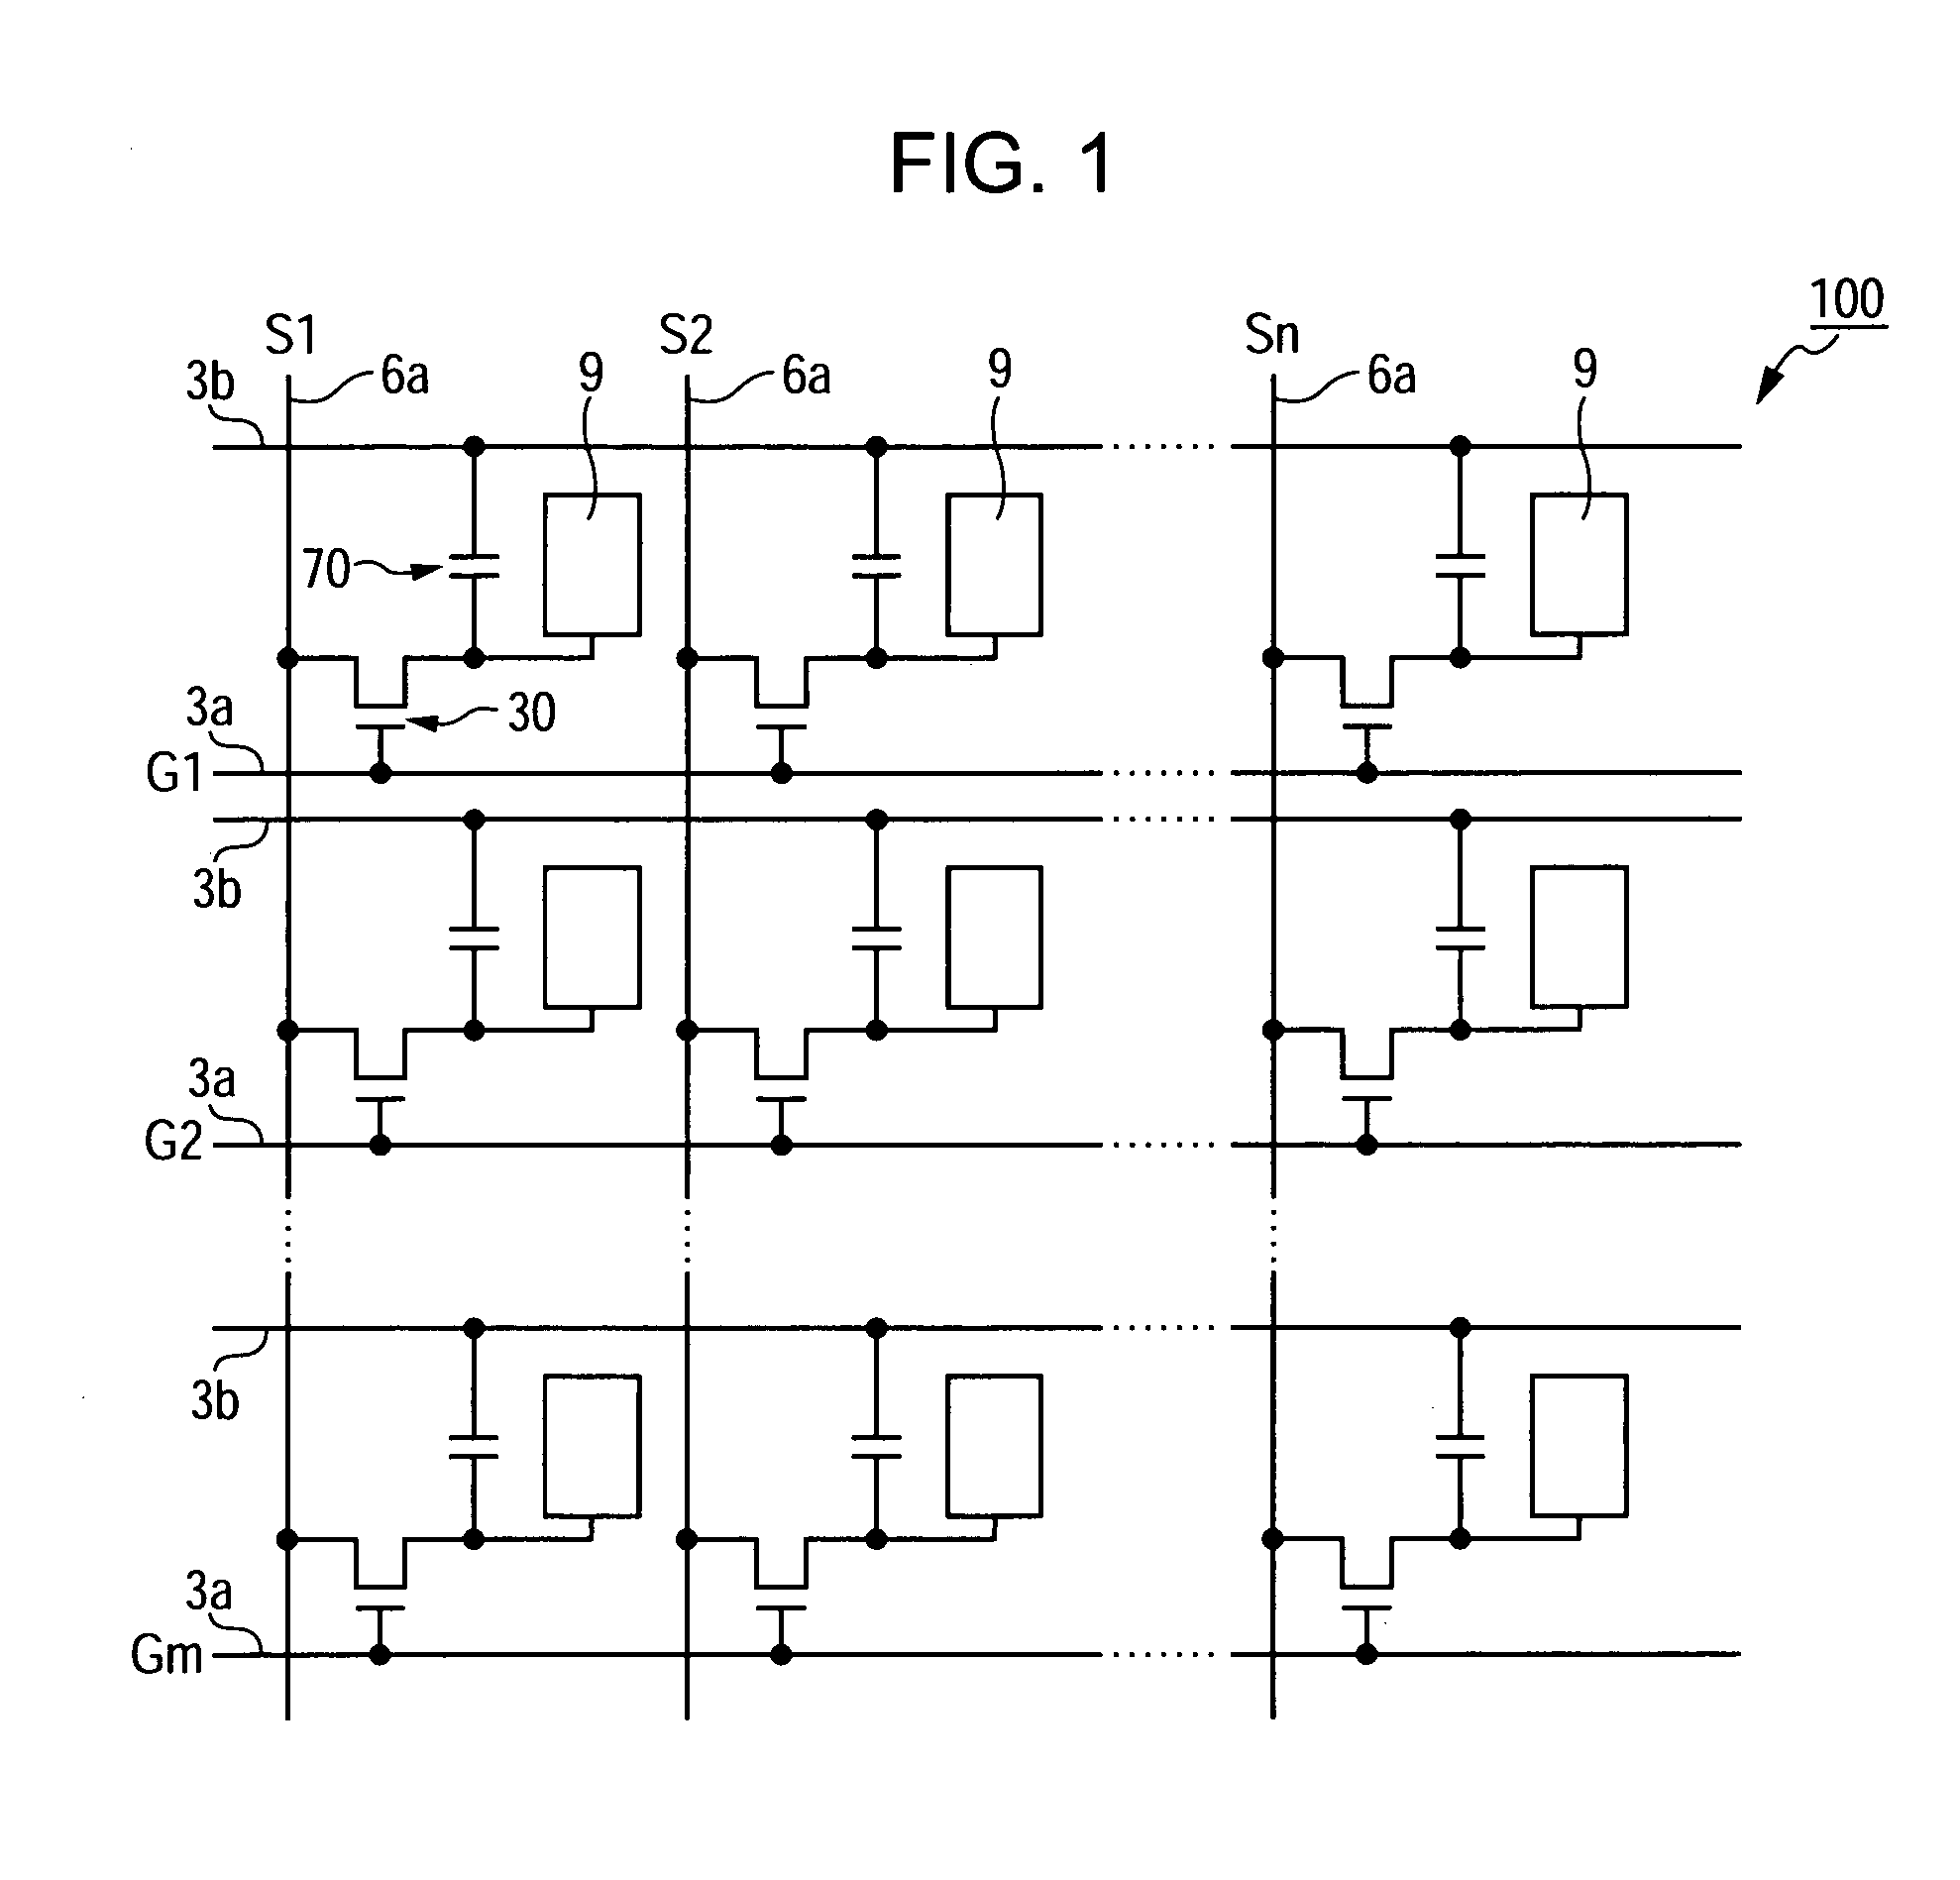 Liquid crystal display device with plurality of interconnected island shaped pixel portions forming pixel electrodes where scanning line overlaps an interconnected portion